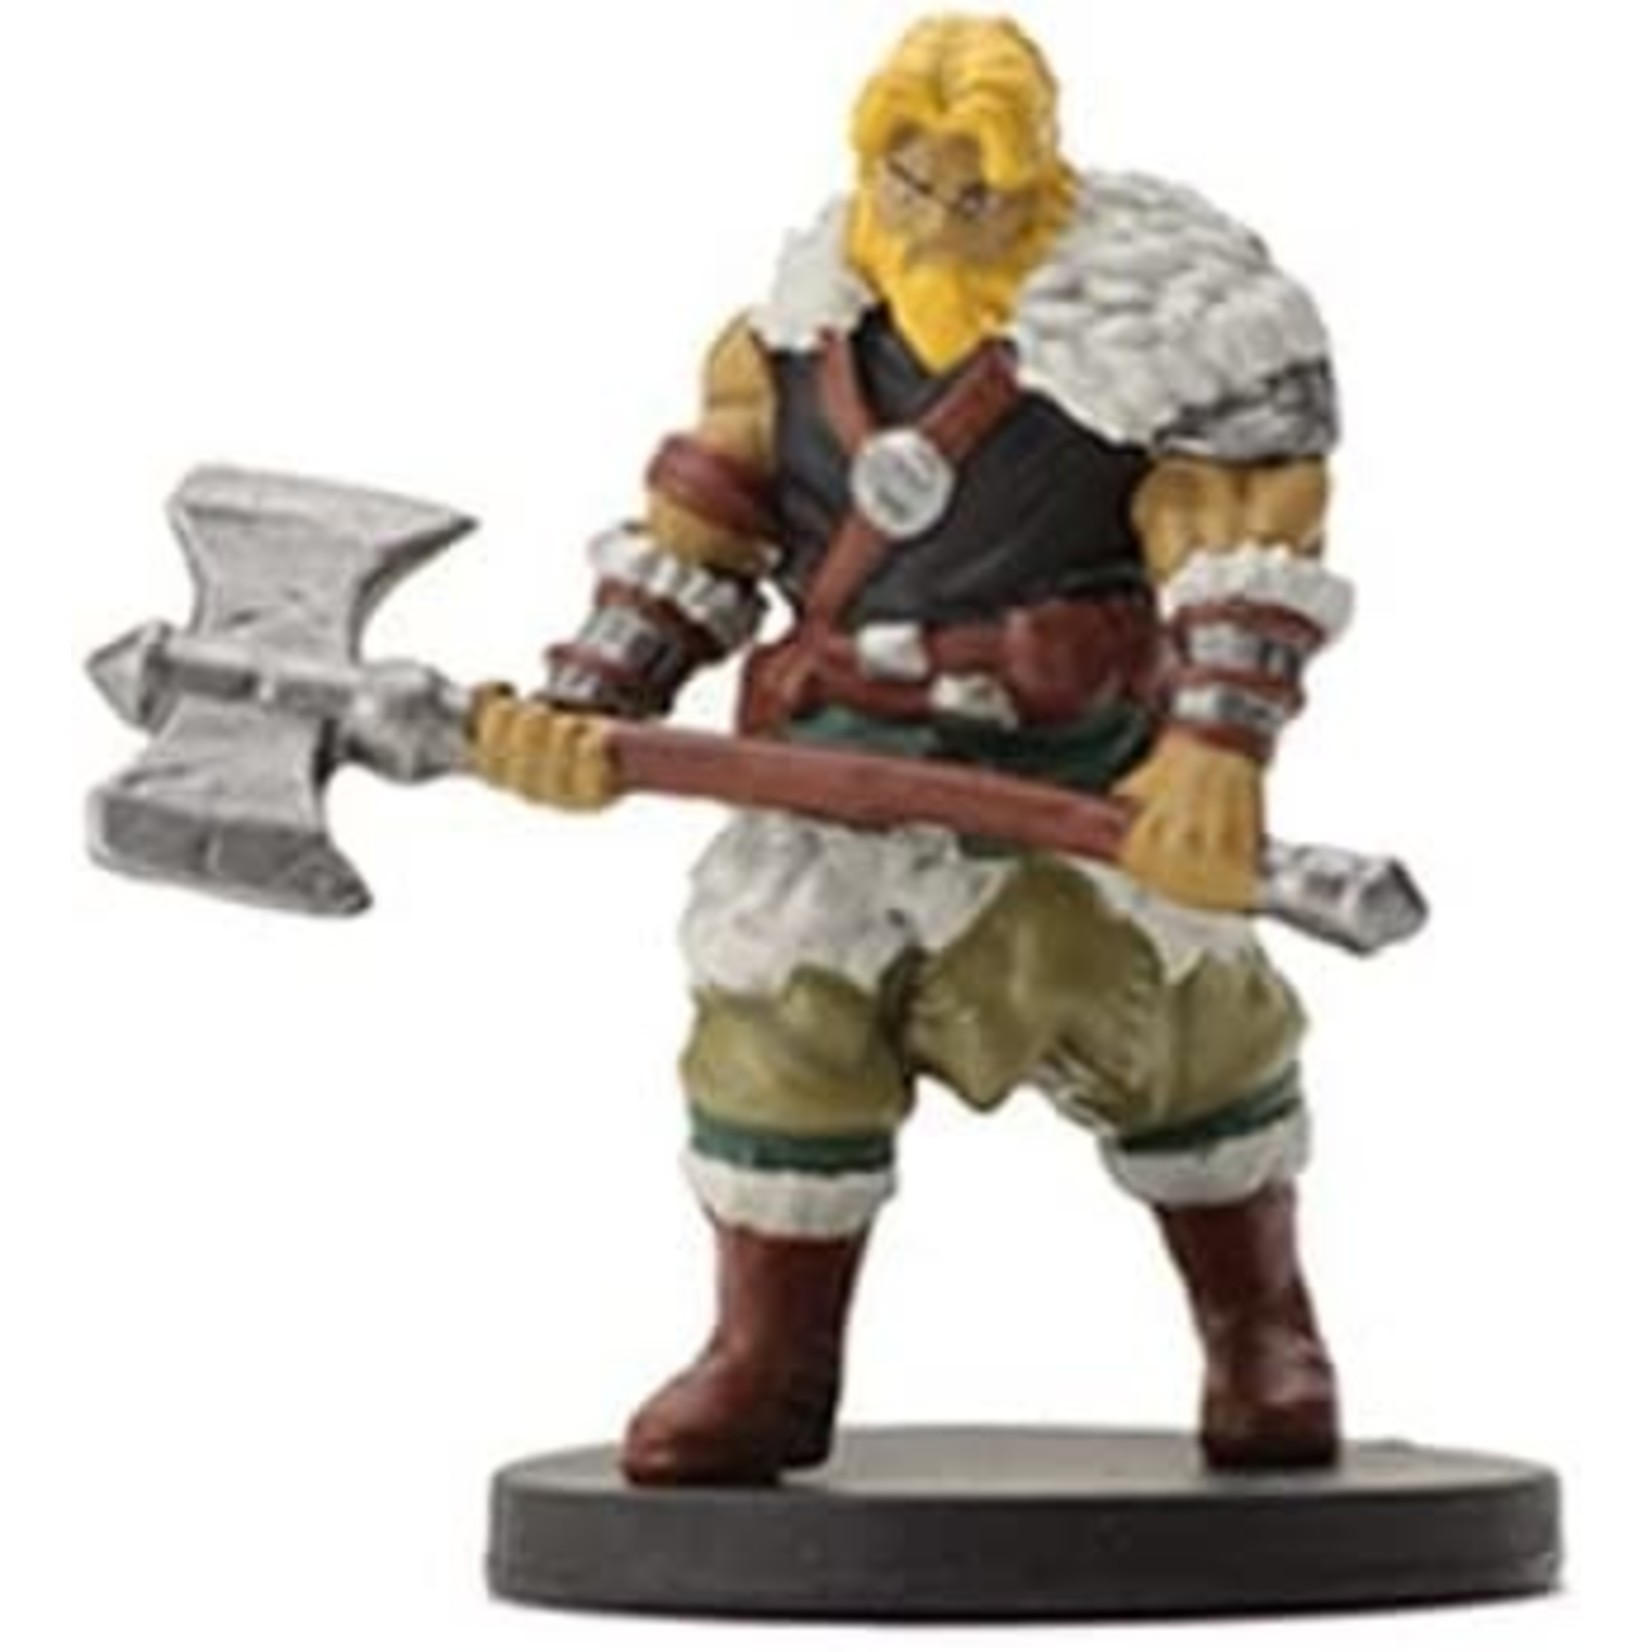 WizKids D&D Minis: Icons of the Realms – Epic Level Starter